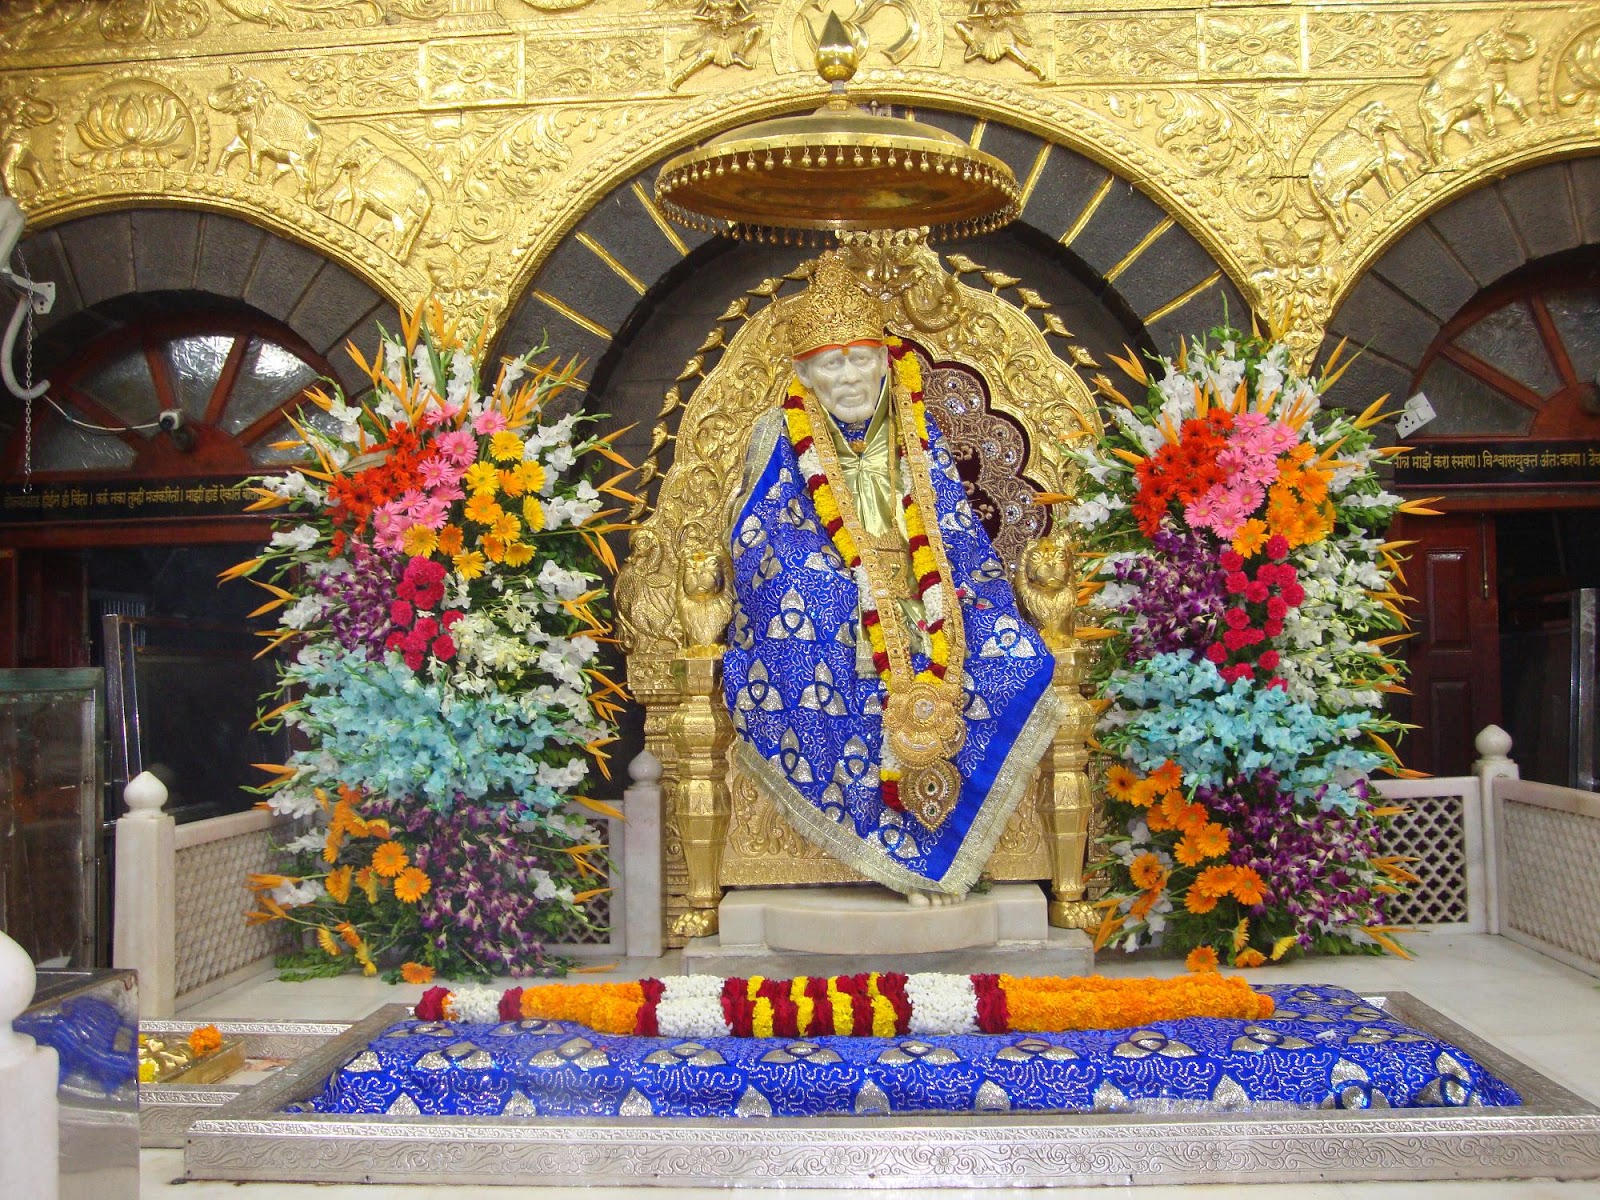 darshan wallpaper,arch,architecture,shrine,place of worship,floristry